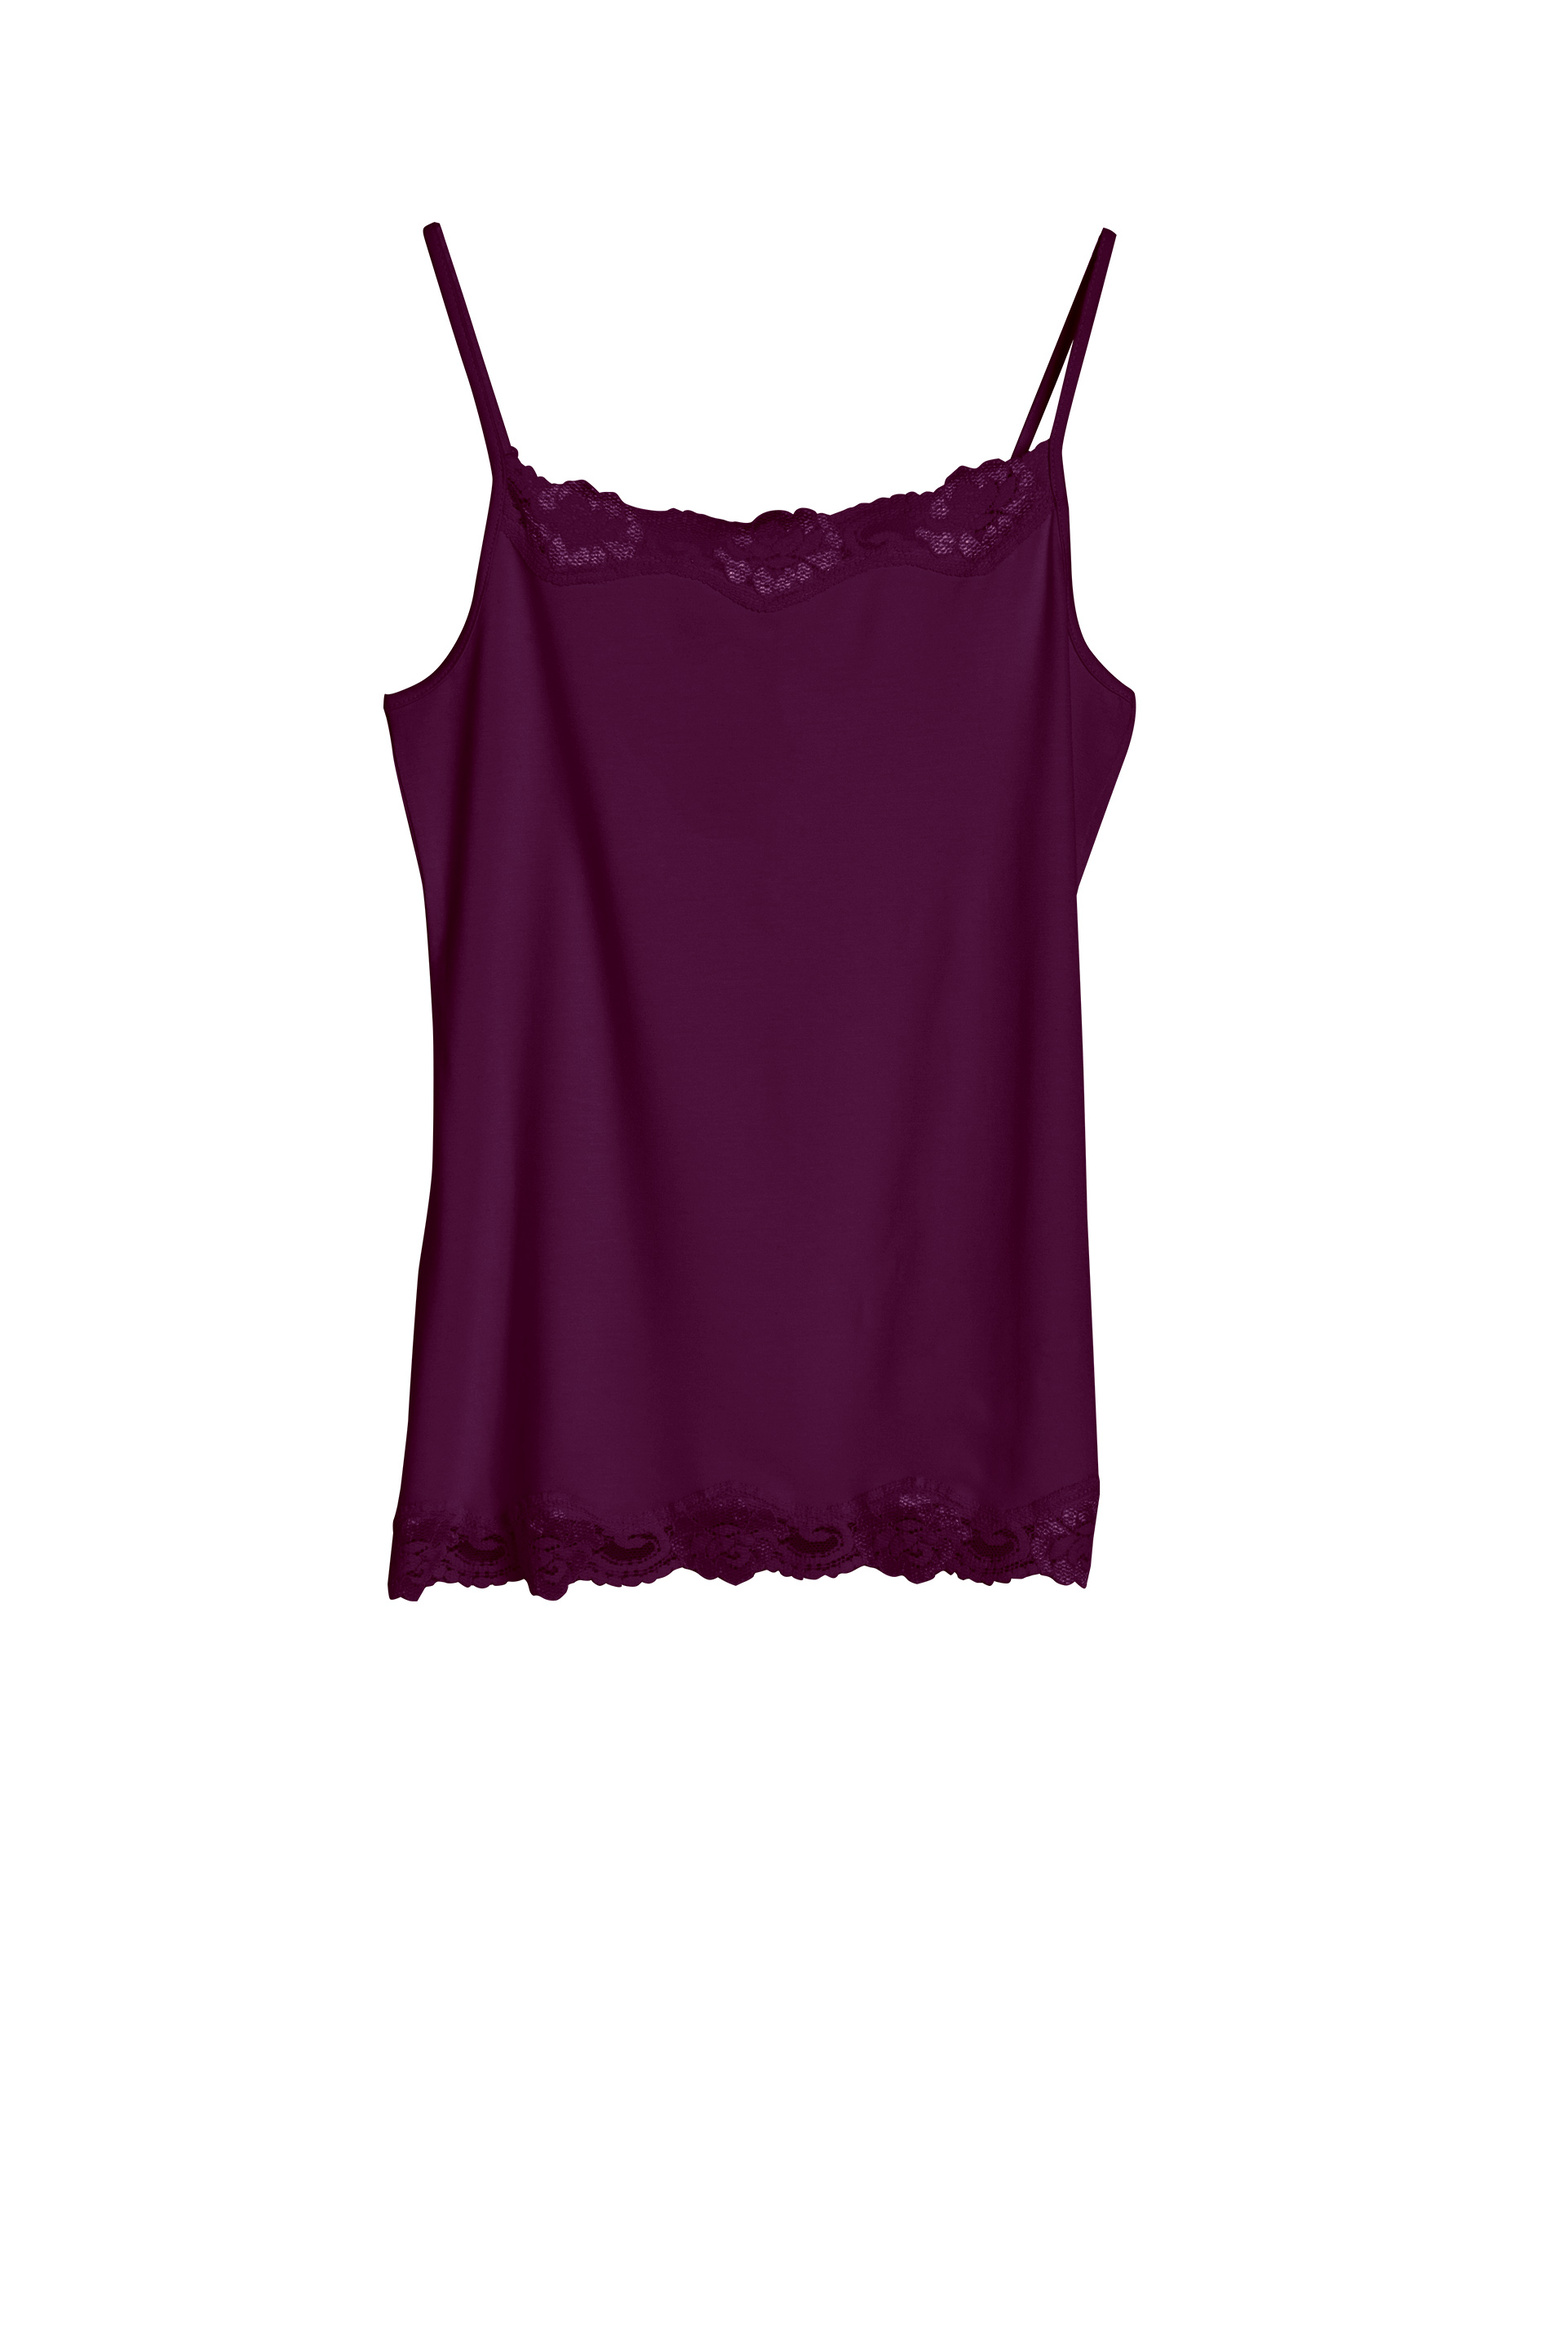 7200_lace_camisole_cassis_new.jpg